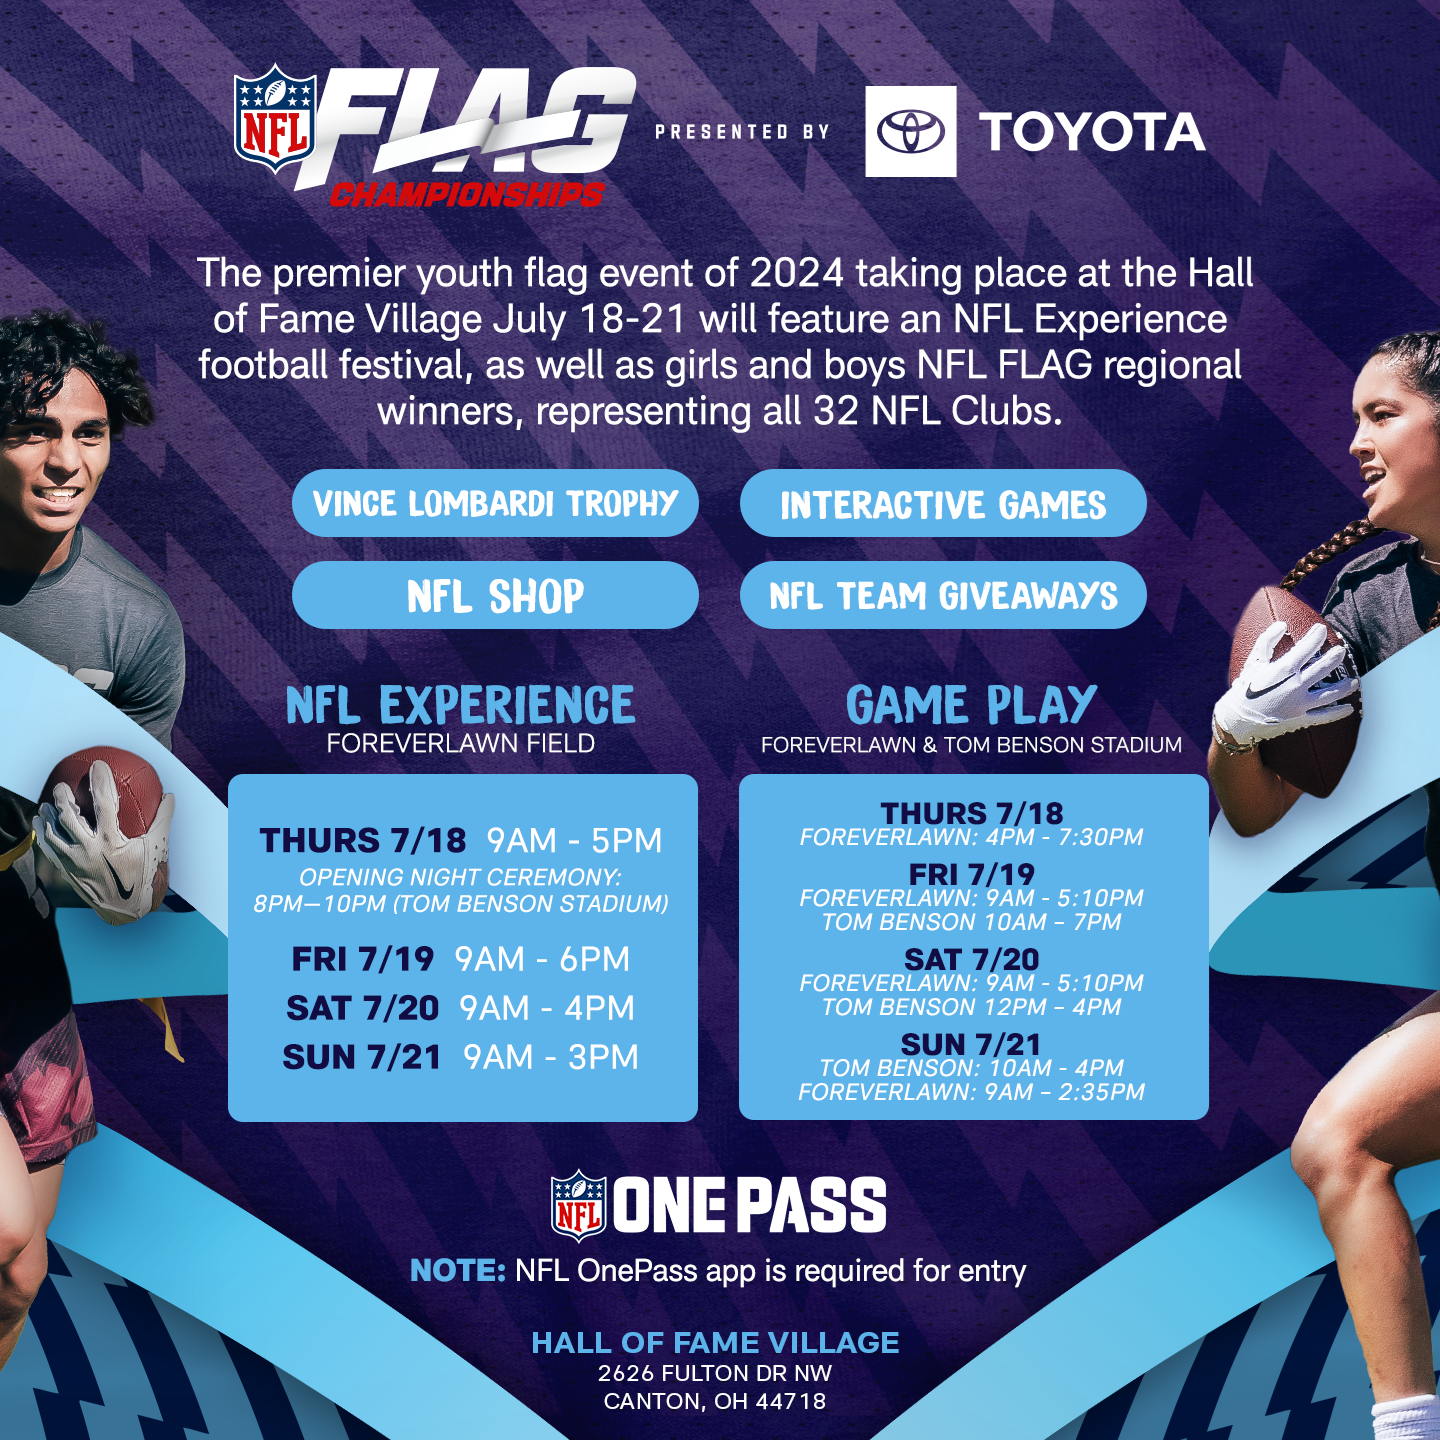 Hall of Fame Village Hosts NFL FLAG Championships Presented by Toyota, July 18-21